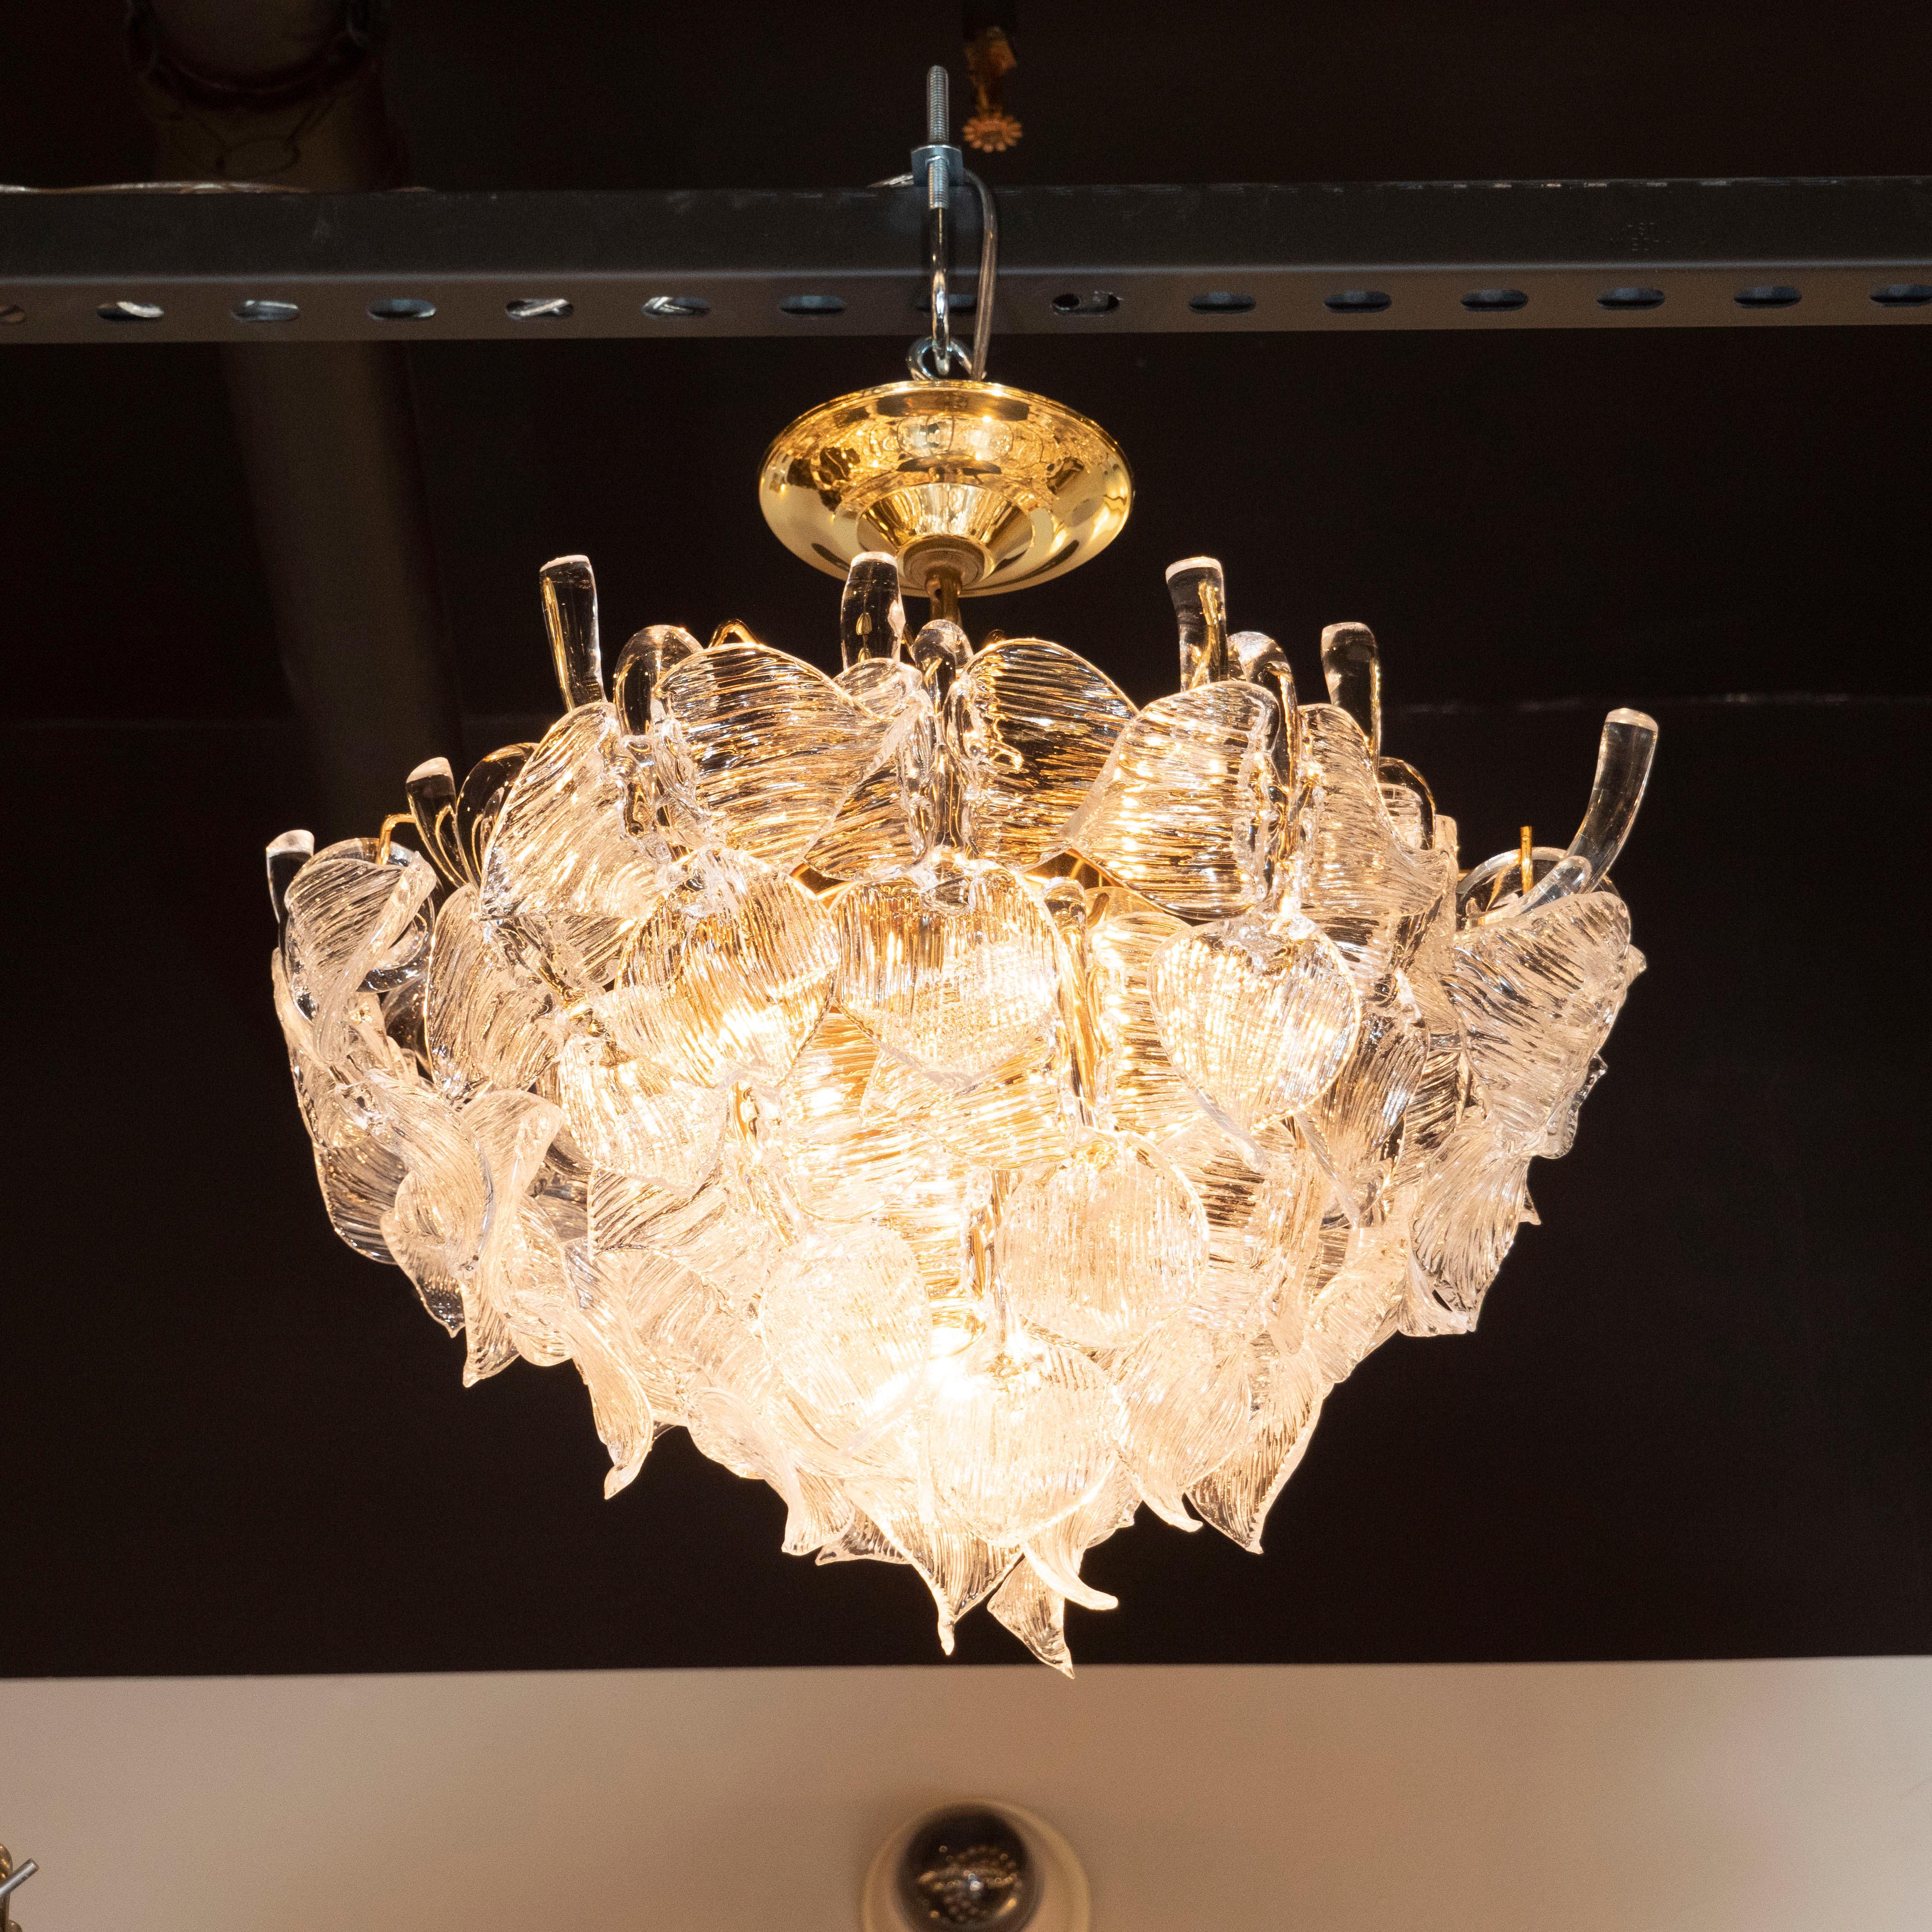 This glamorous chandelier was realized by the celebrated Mid Century Italian lighting studio, Camer, in Italy circa 1970. It features an abundance of handblown translucent glass shades resembling a grouping of stylized leaves. They have finely